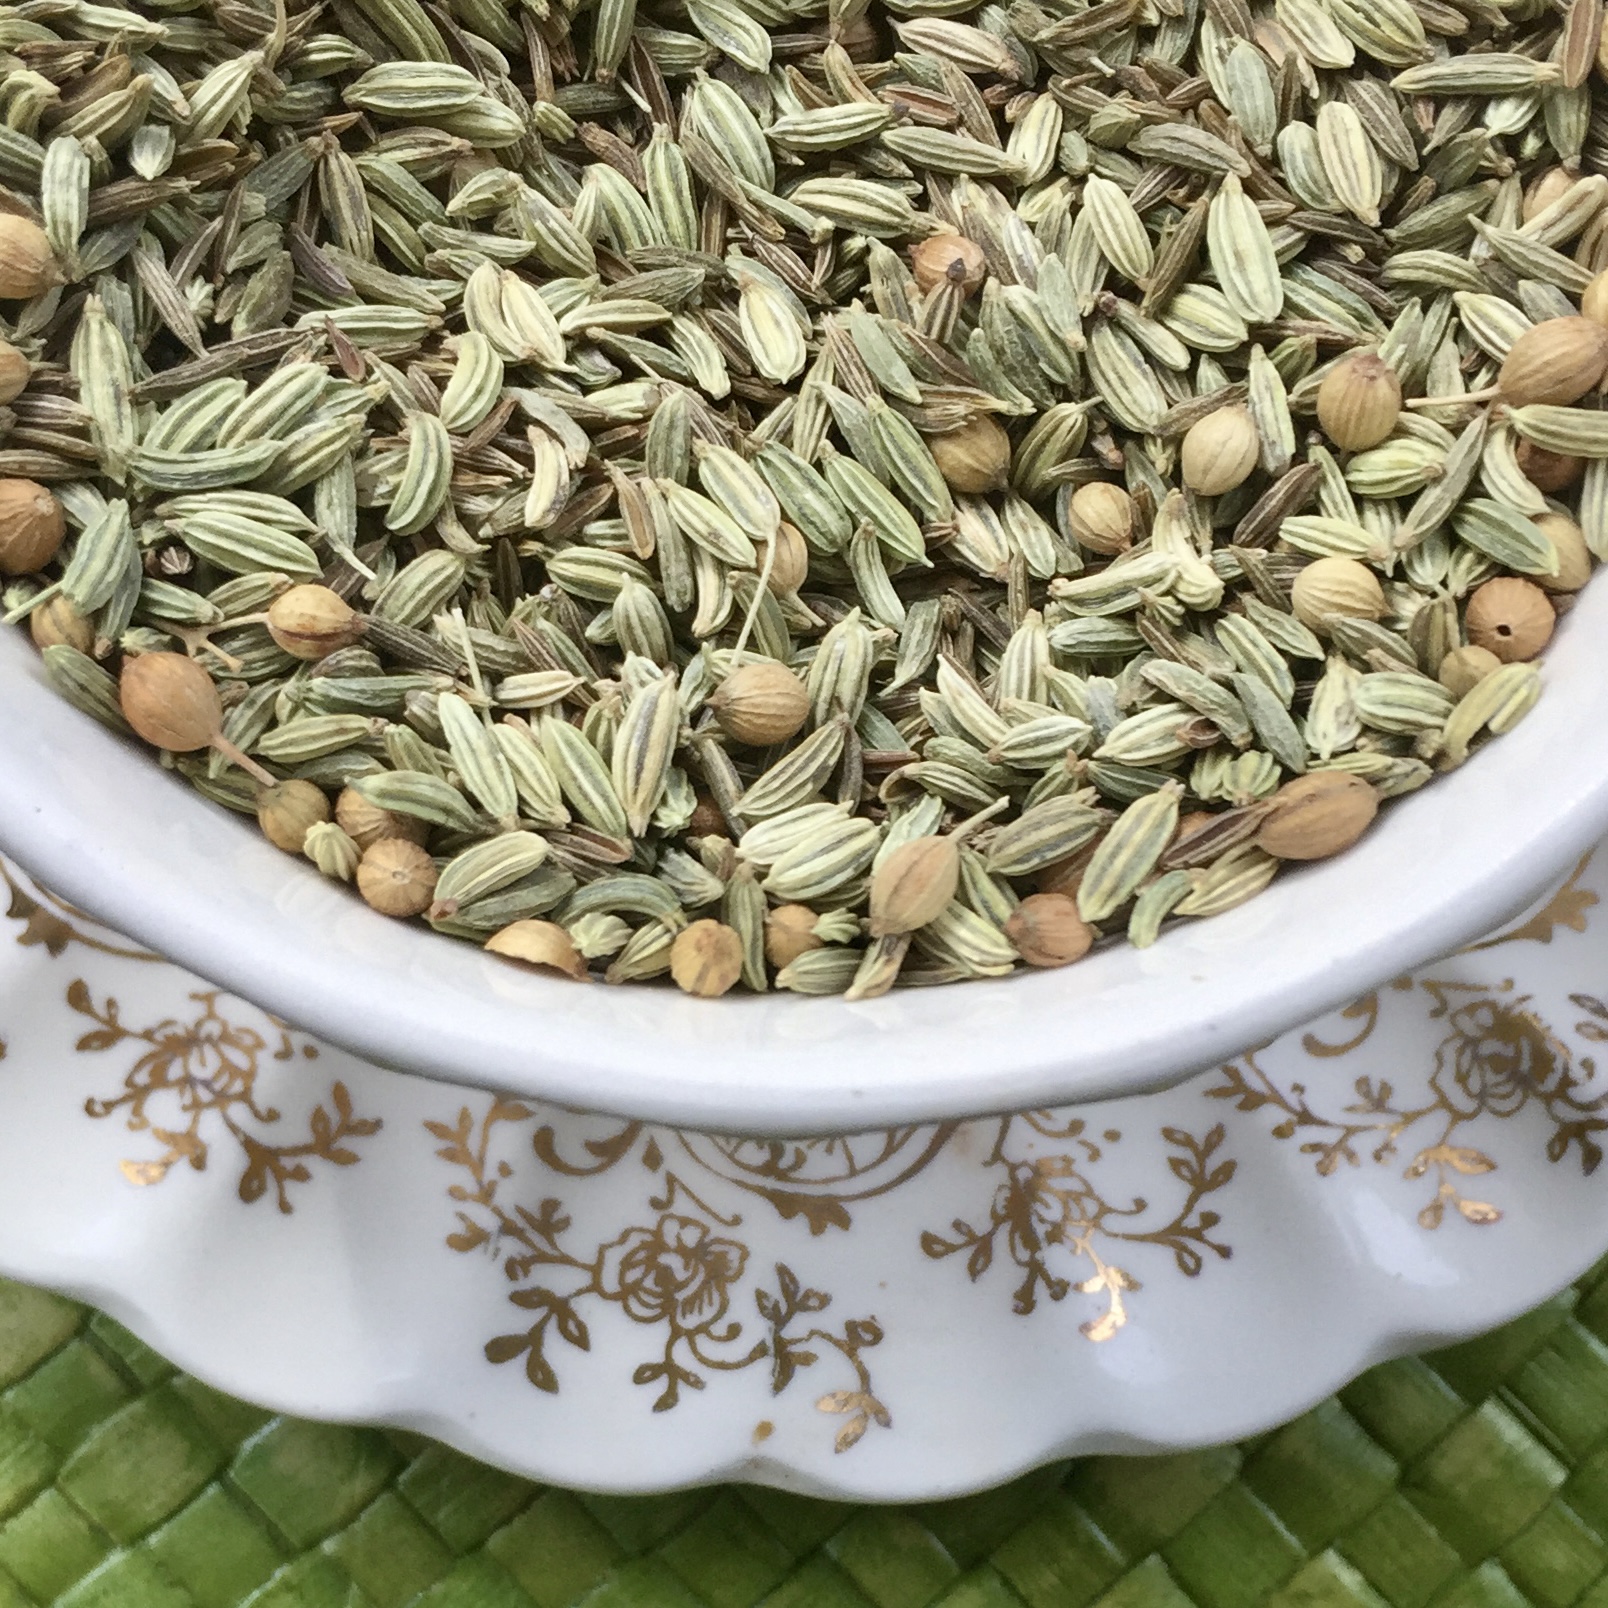 Cumin Coriander and Fennel seeds in a bowl for making spring cleanse detox tea